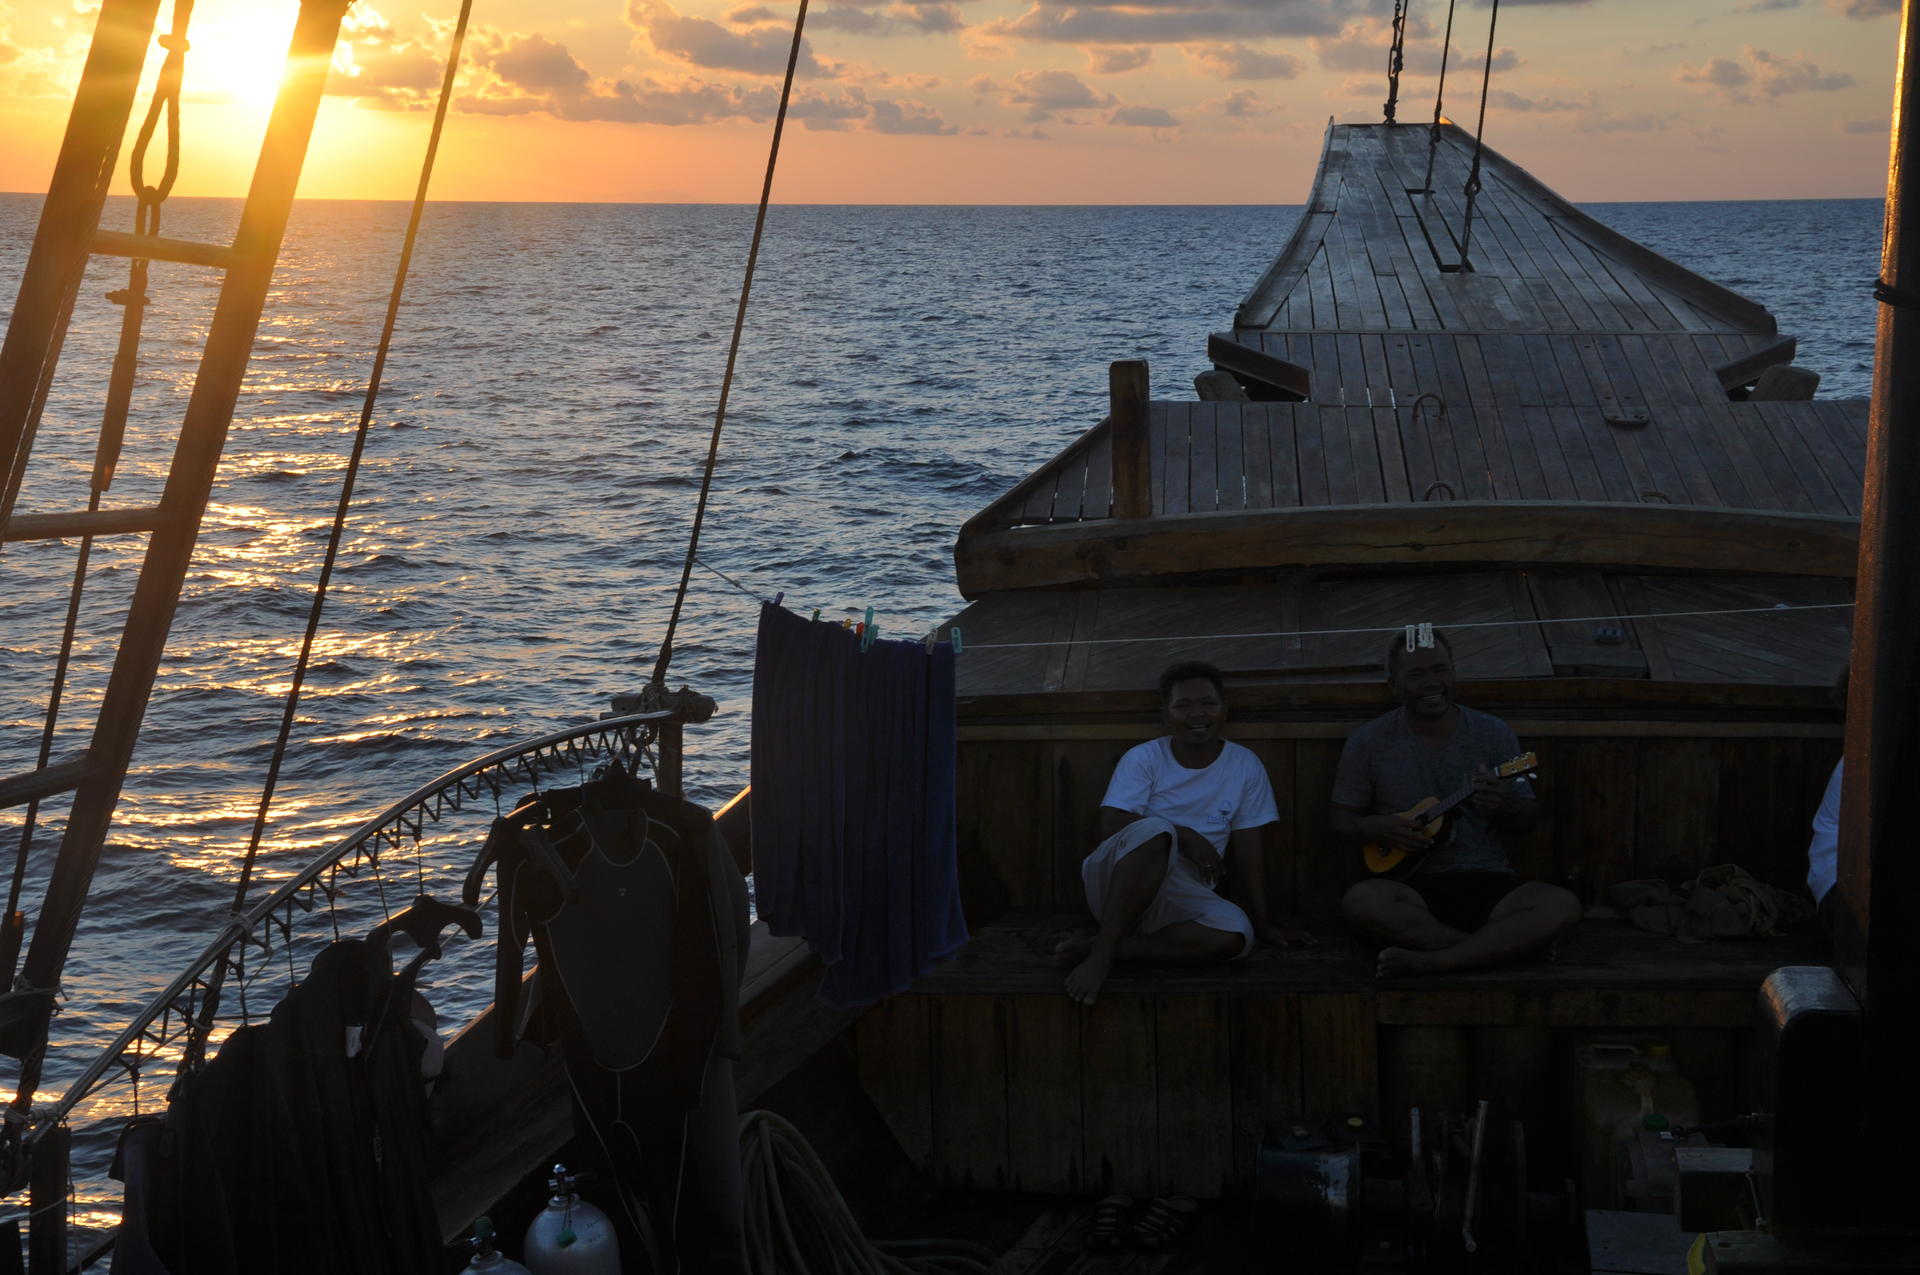 Sunset on a live-aboard dive boat. Our vessel, The Damai, is styled after the phinisi, a traditional Indonesian two-masted sailing ship. Photos: Holly McDonald